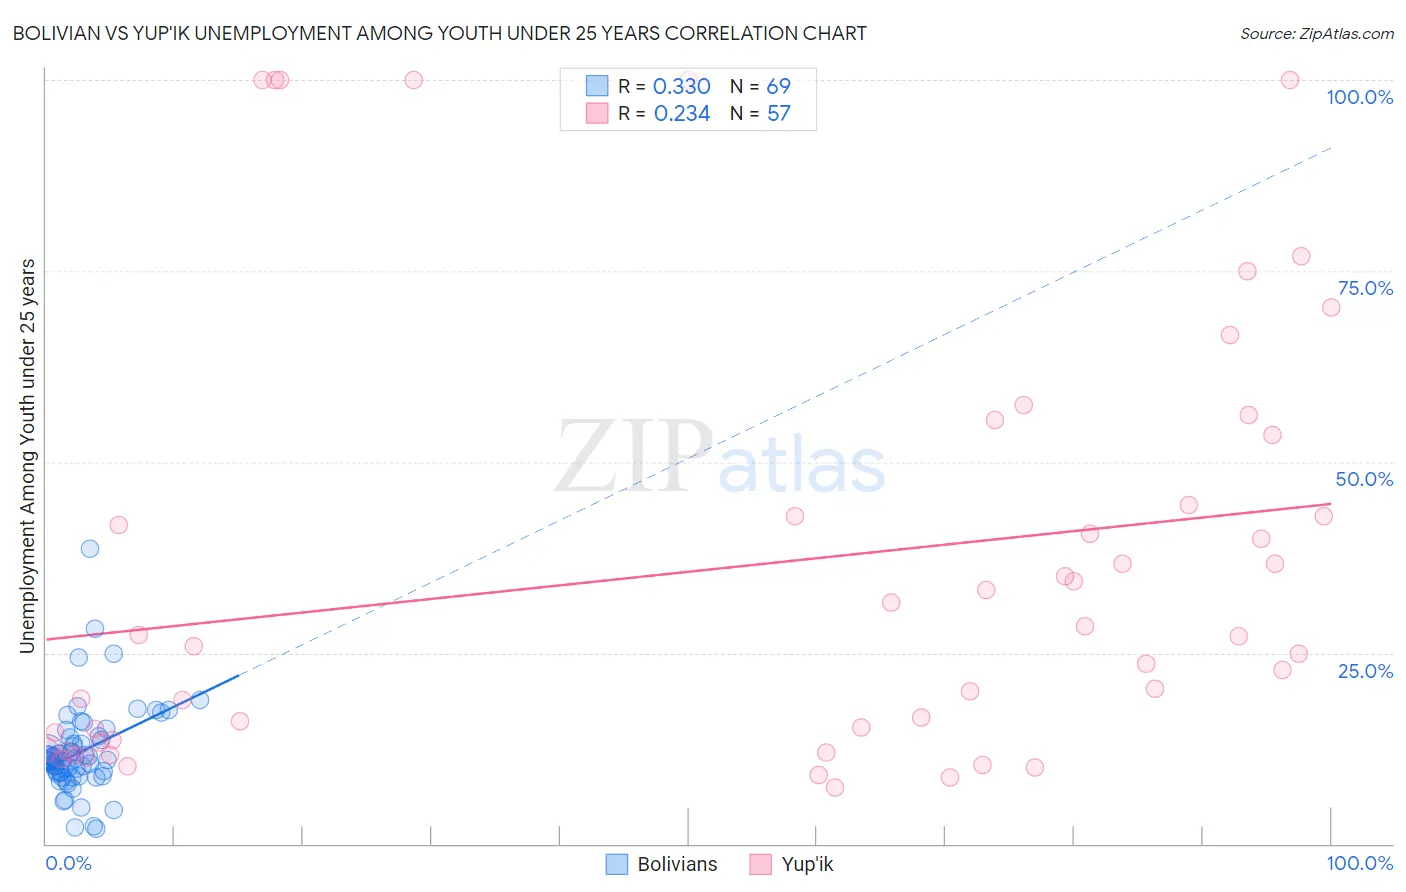 Bolivian vs Yup'ik Unemployment Among Youth under 25 years